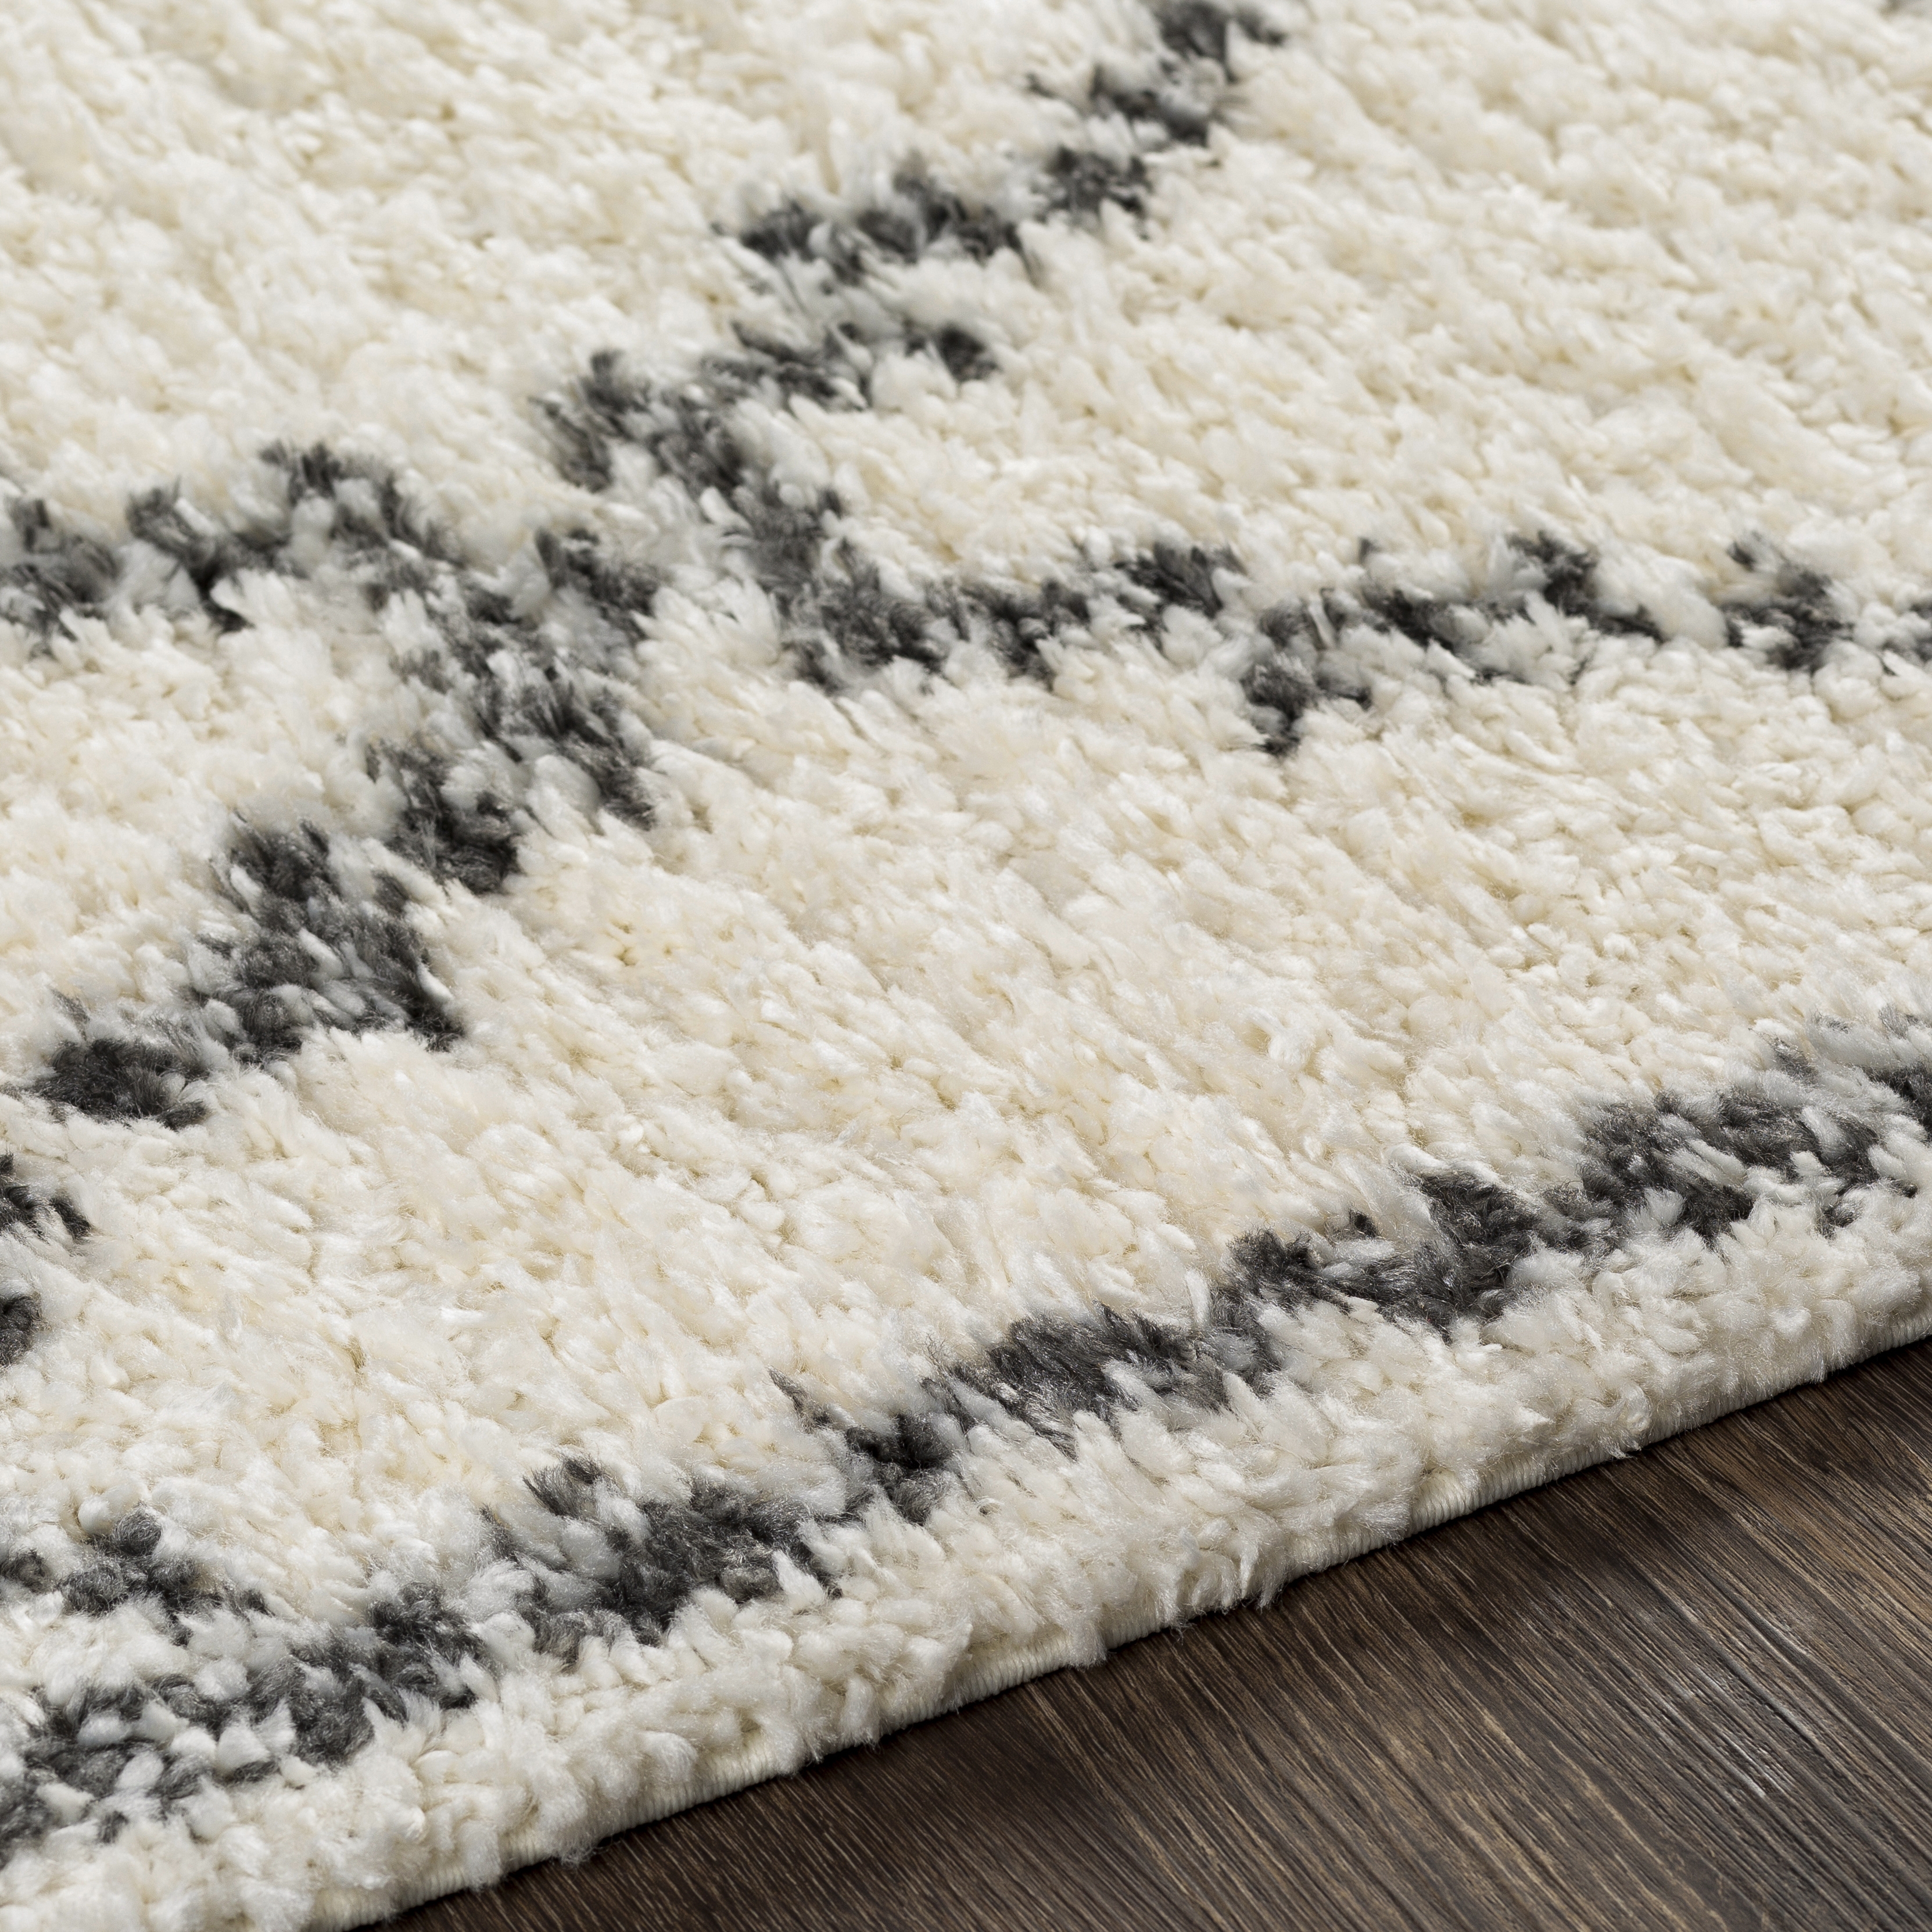 Deluxe Shag Rug, 5'3" x 7'3" - Image 3